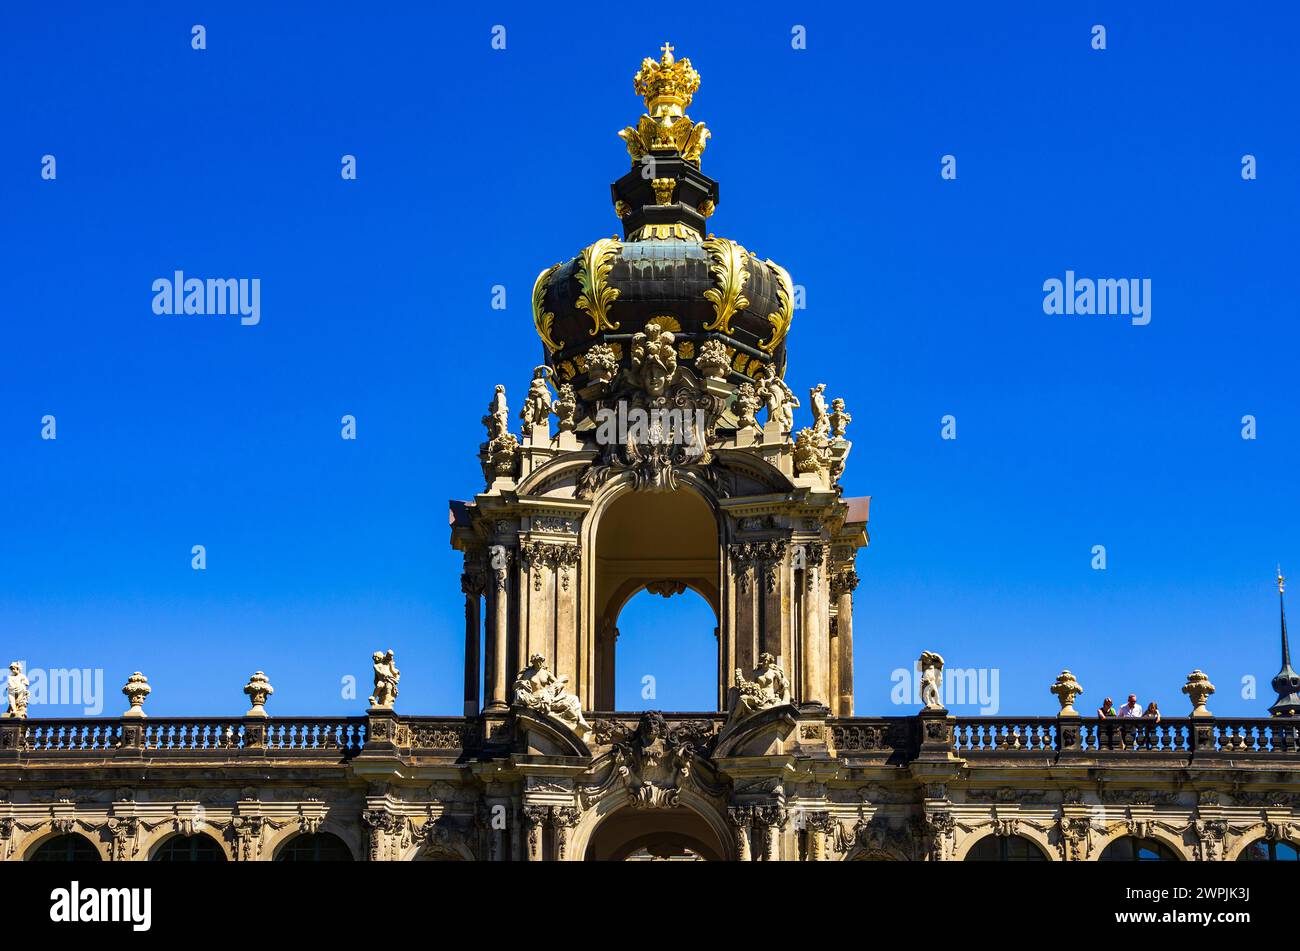 The Crown Gate of the Zwinger Palace, a jewel of Saxon Baroque, in Dresden, Saxony, Germany. Stock Photo